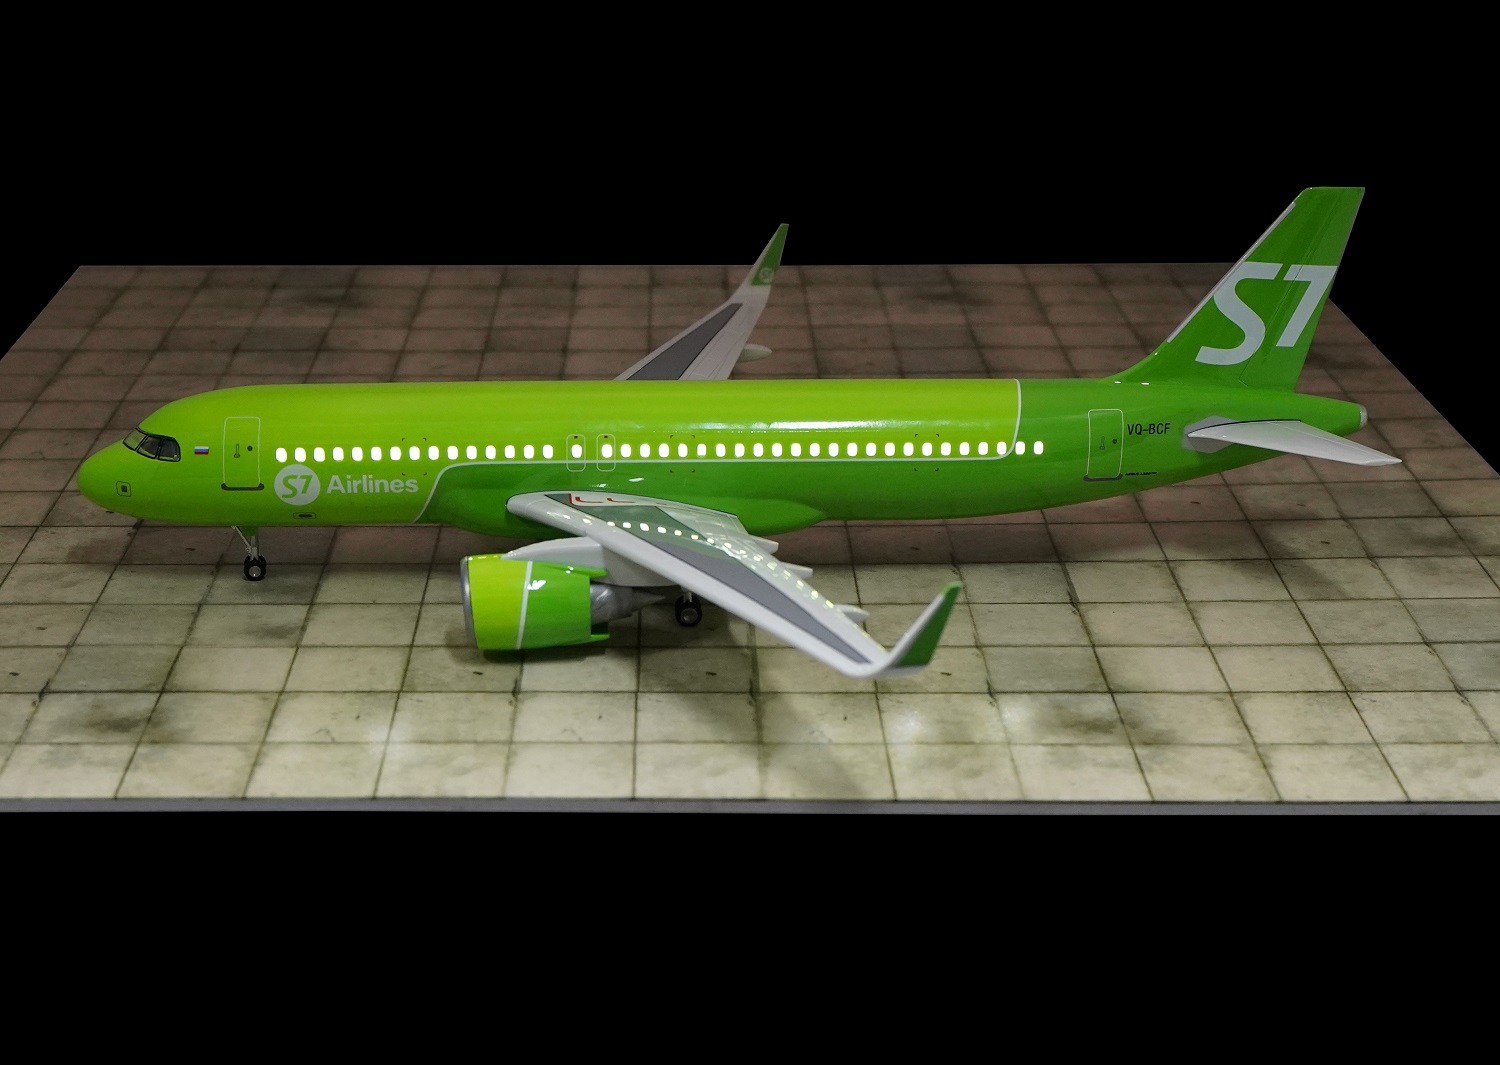   Airbus A320 Neo,  S7 Airlines .    .  # 1 hobbyplus.ru